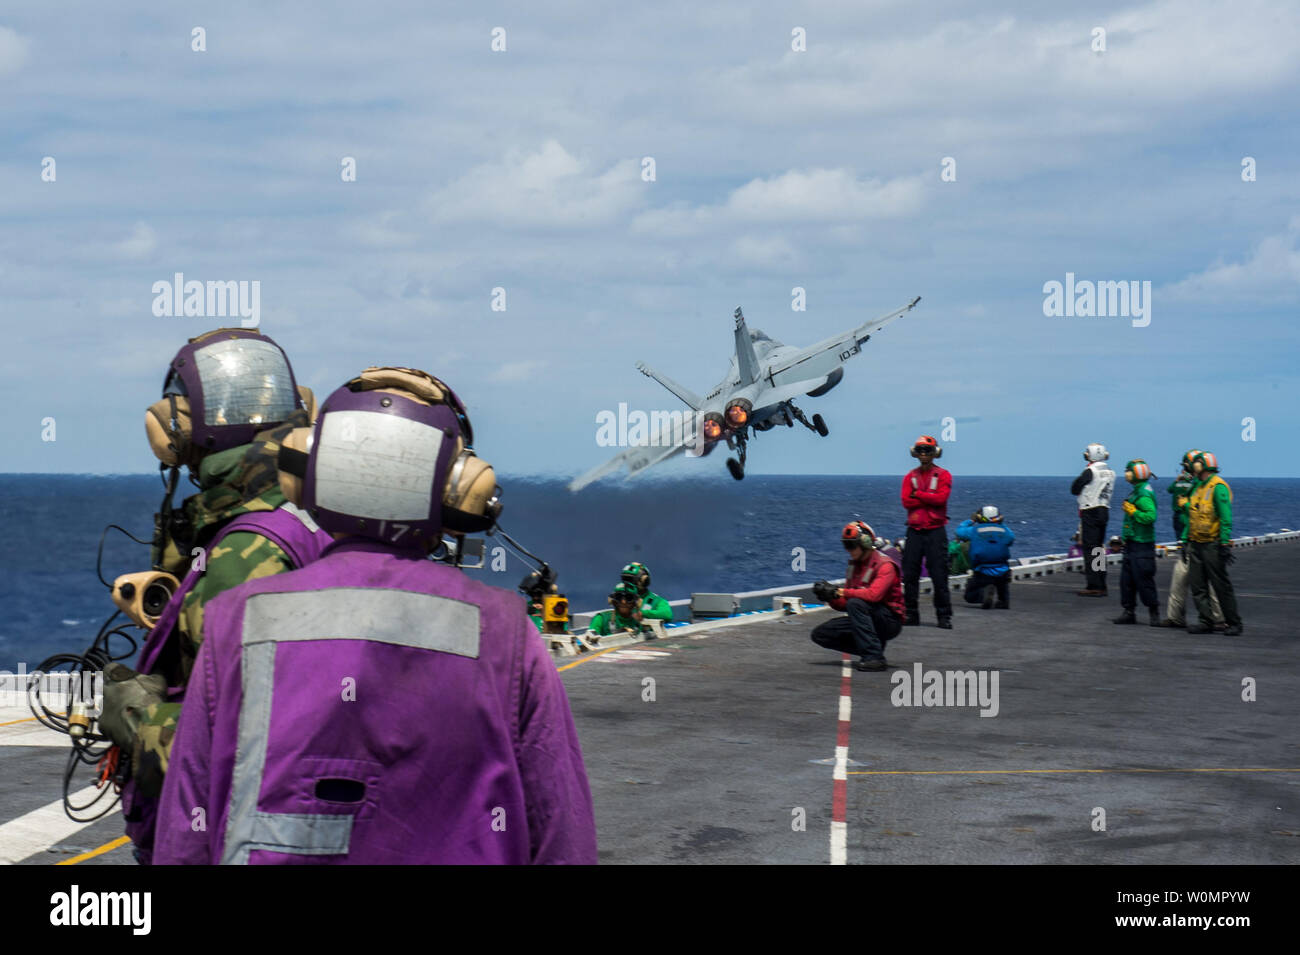 Sailors watch as an F/A-18F Super Hornet assigned to the Black Aces of Strike Fighter Squadron (VFA) 41 launches from USS John C. Stennis' (CVN 74) flight deck on August 7, 2016, during an air power demonstration. Providing a combat-ready force to protect collective maritime interests, John C. Stennis is on a regularly scheduled Western Pacific deployment. Photo by Jake Greenberg/U.S. Navy/UPI Stock Photo